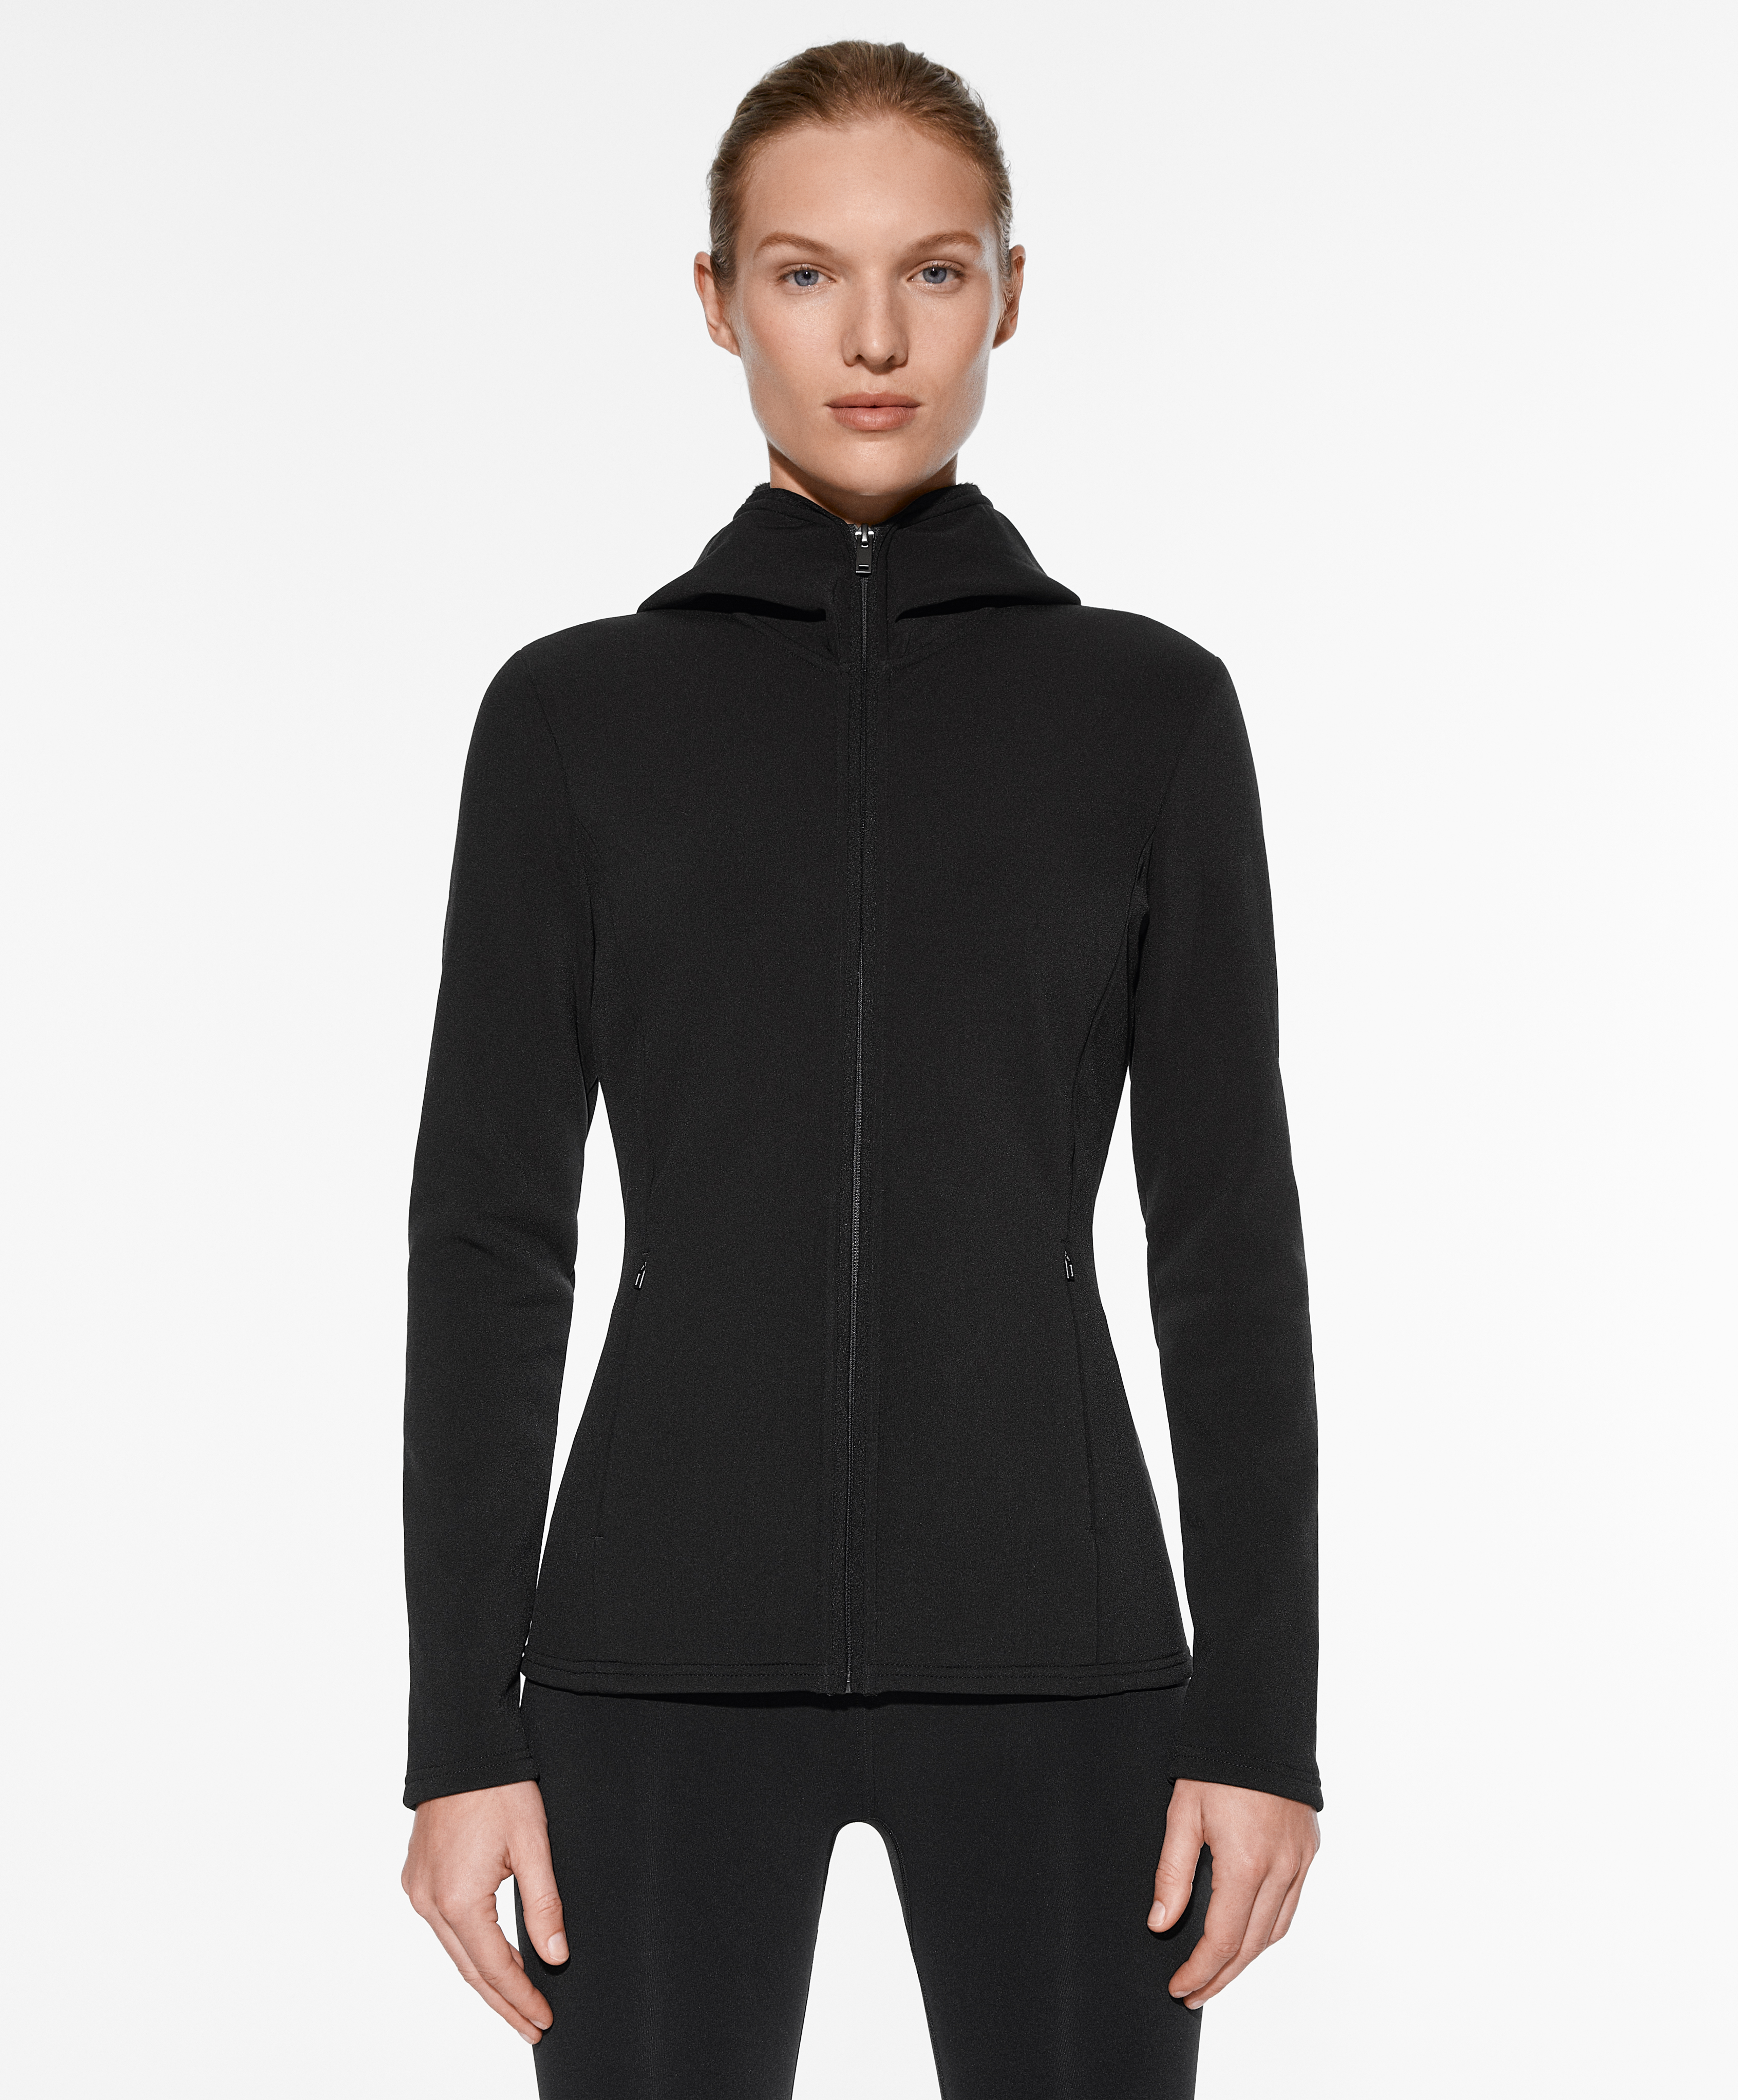 Seamless super extra warm hooded technical jacket